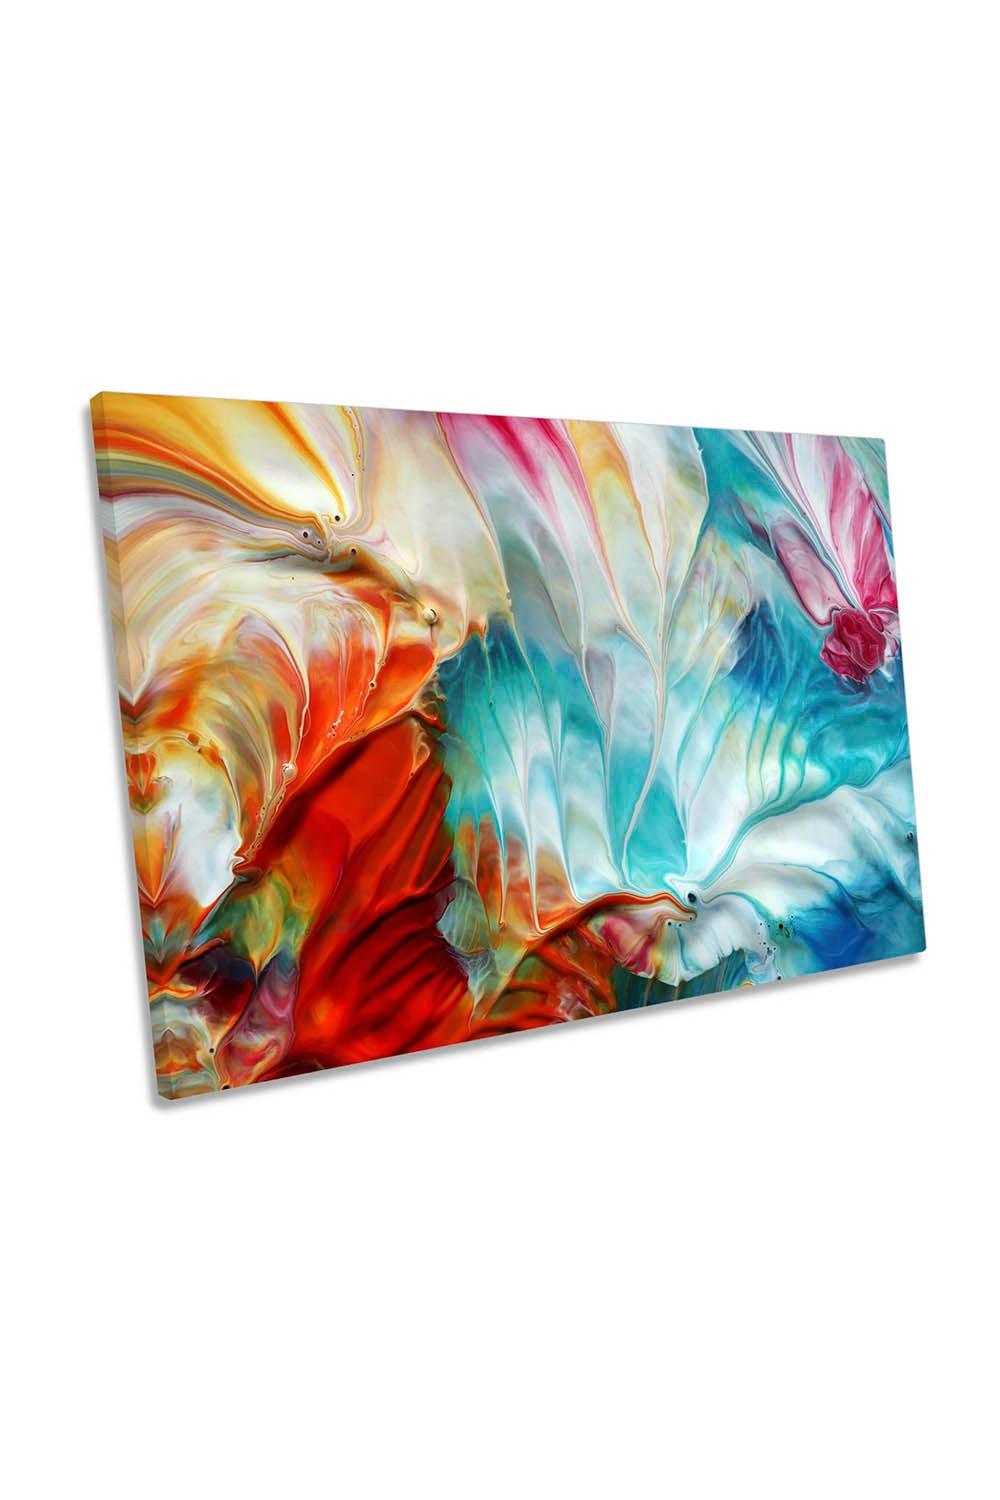 Abstract Seasons Paint Strokes Oil Canvas Wall Art Picture Print